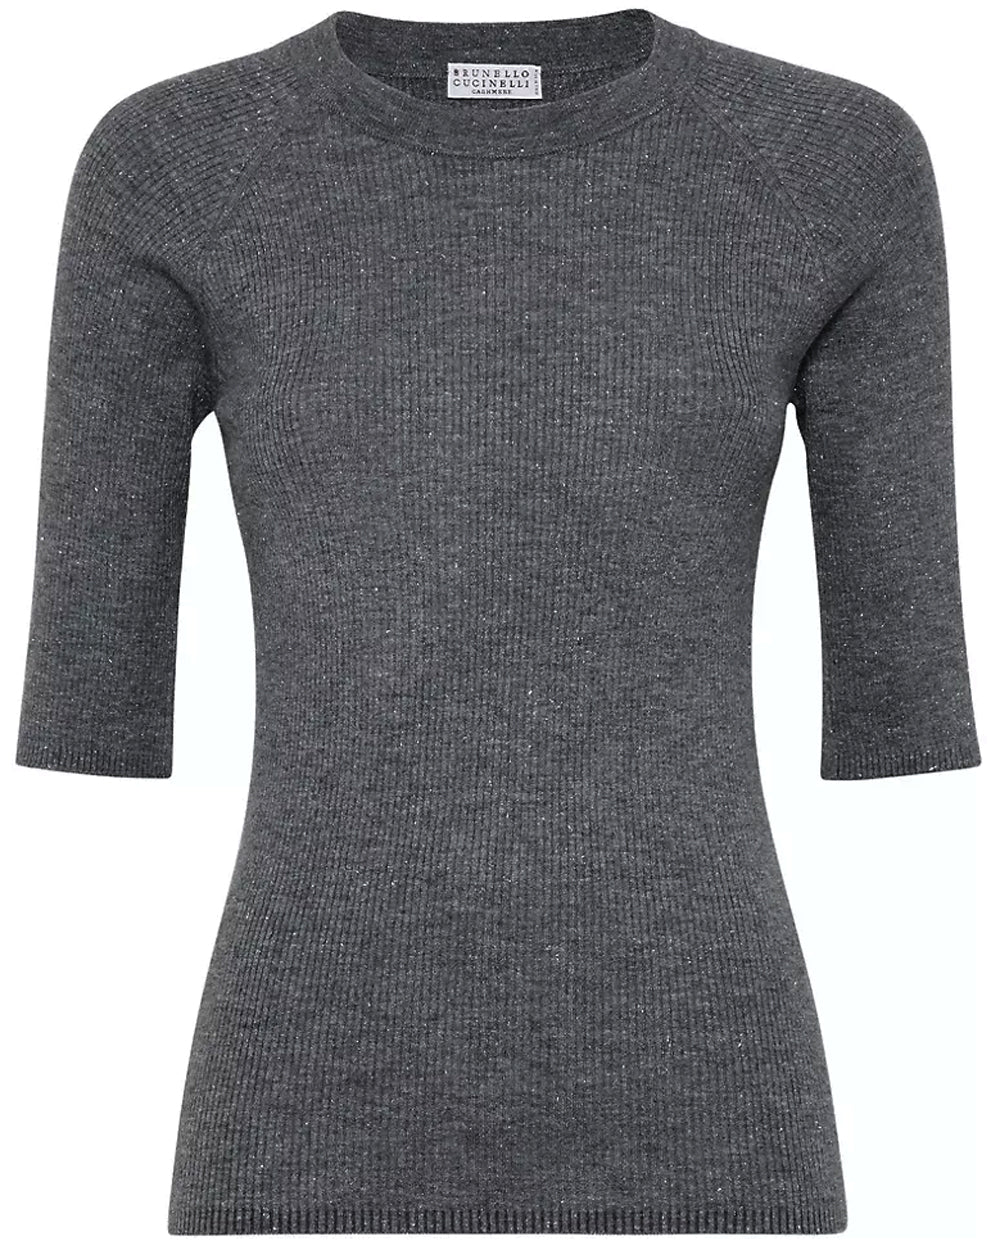 Charcoal Ribbed Knit Short Sleeve Top